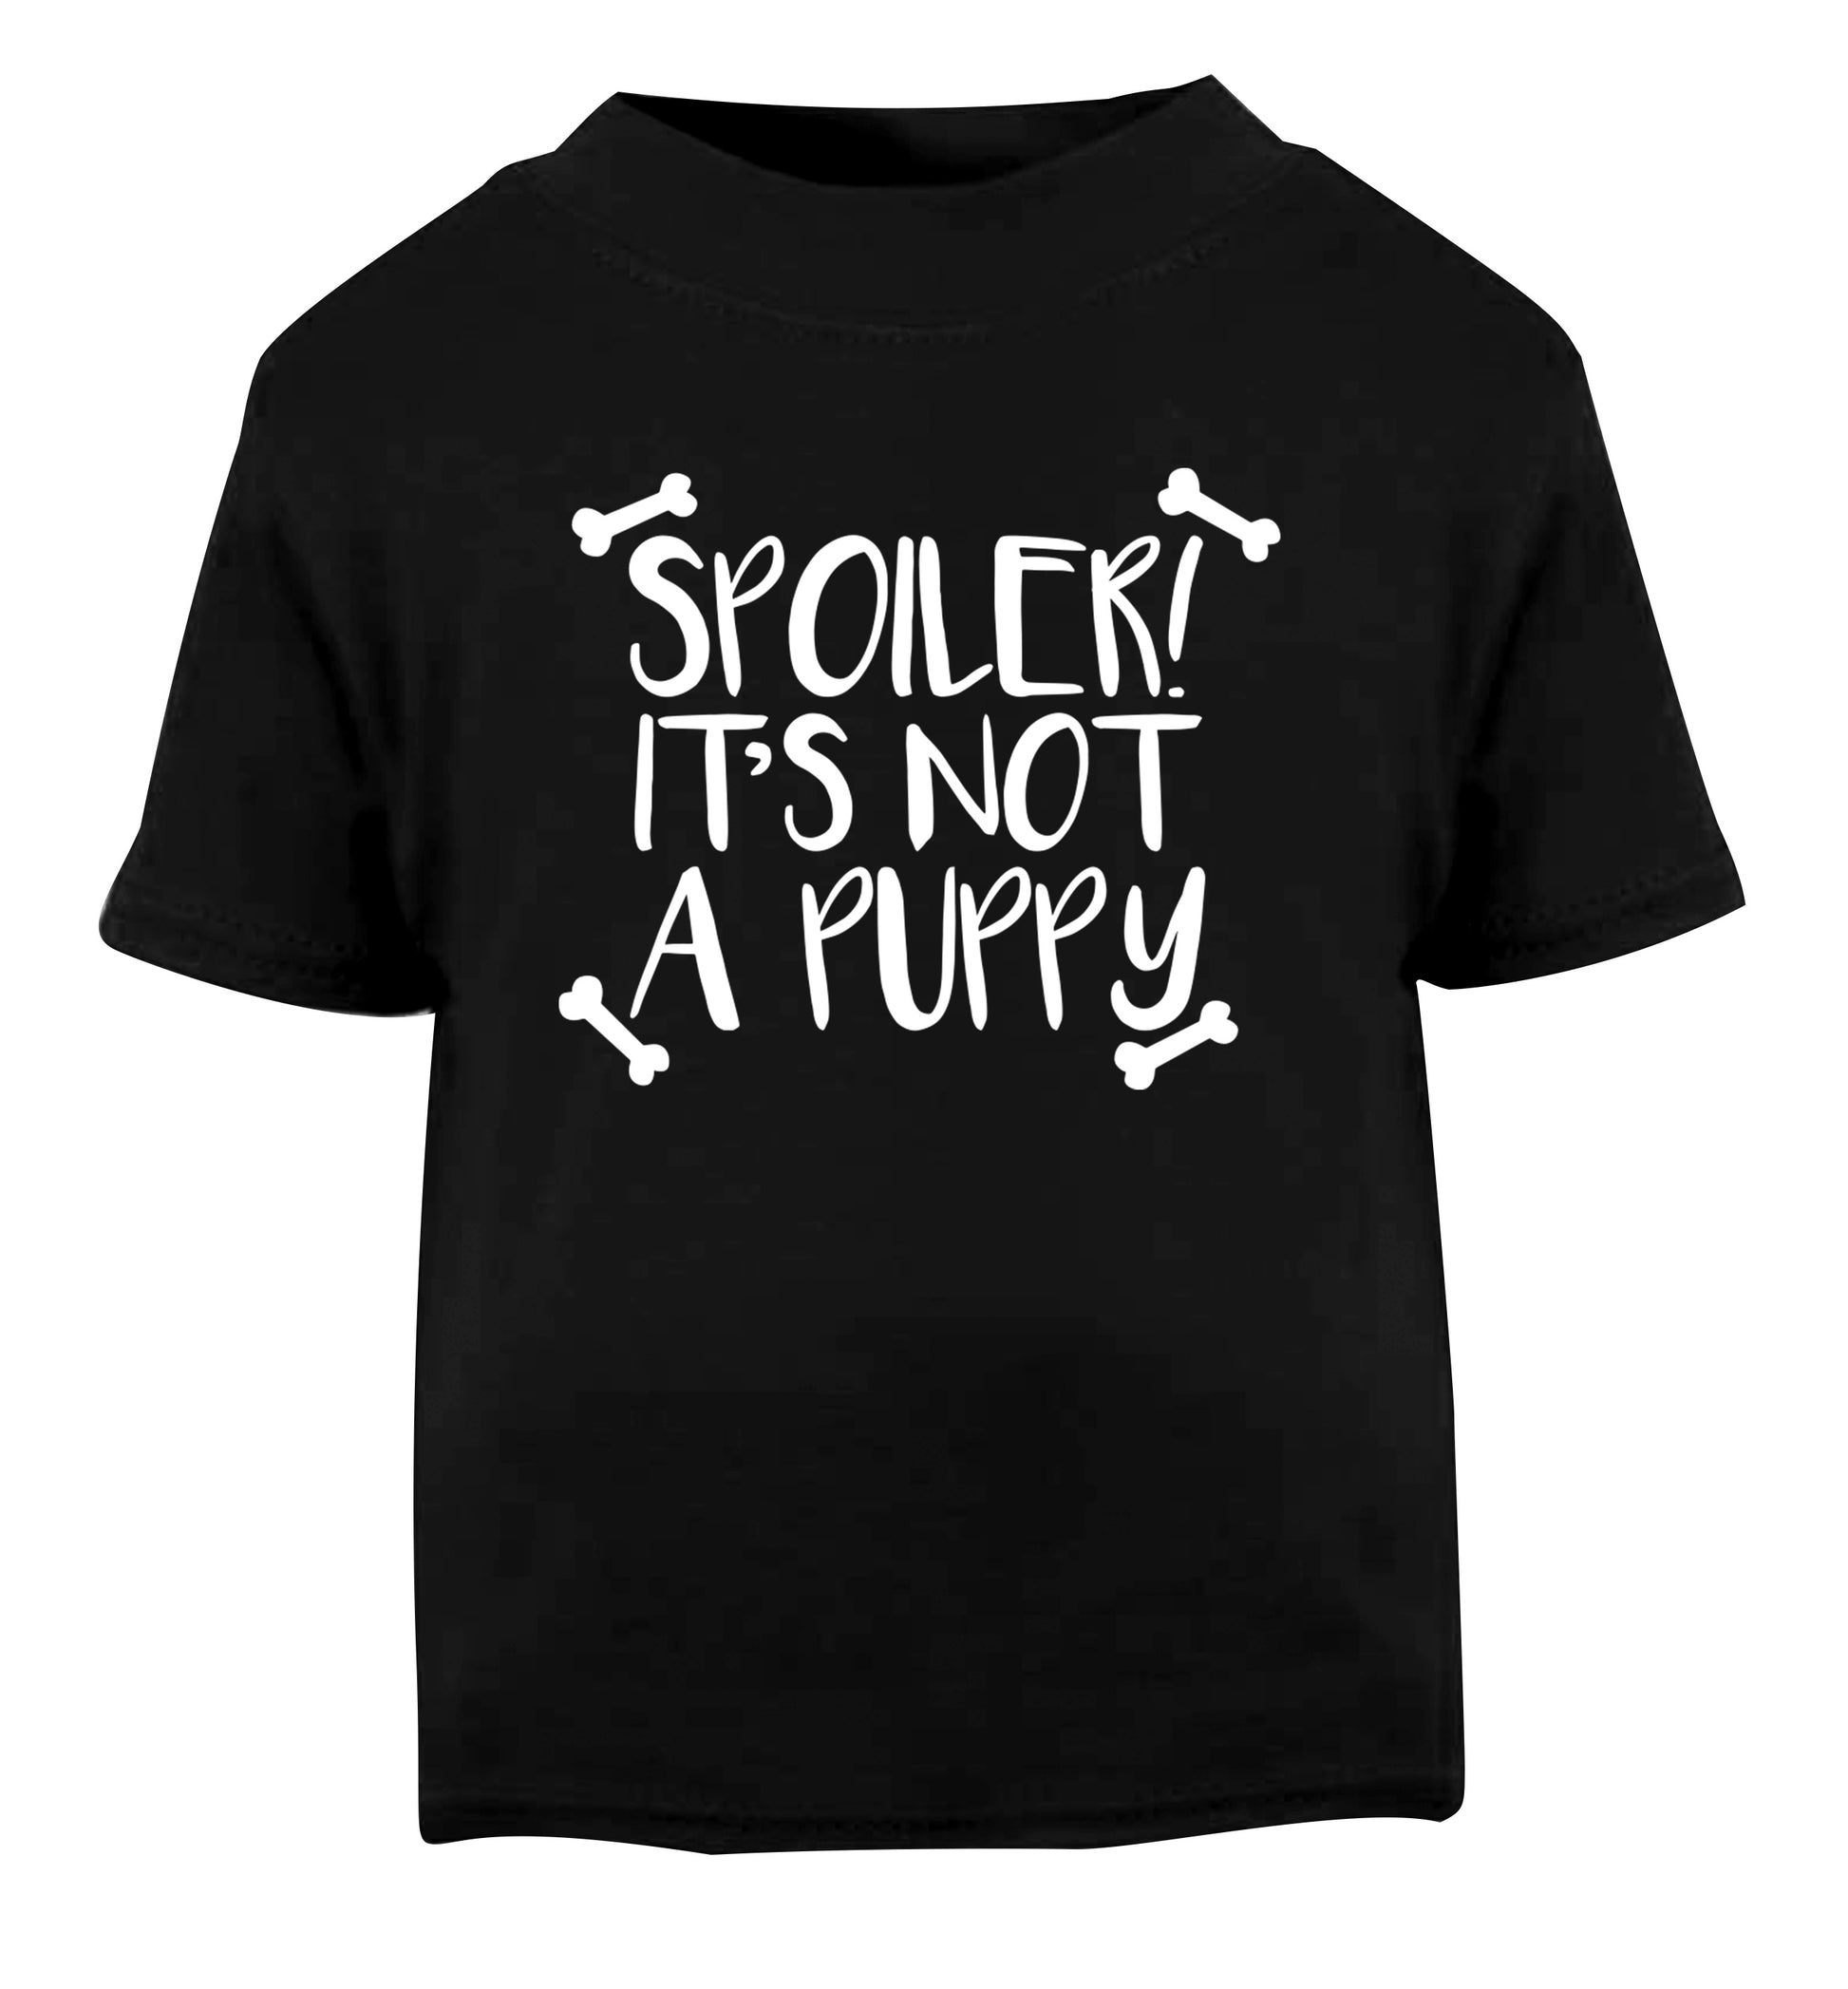 Spoiler it's not a puppy Black Baby Toddler Tshirt 2 years